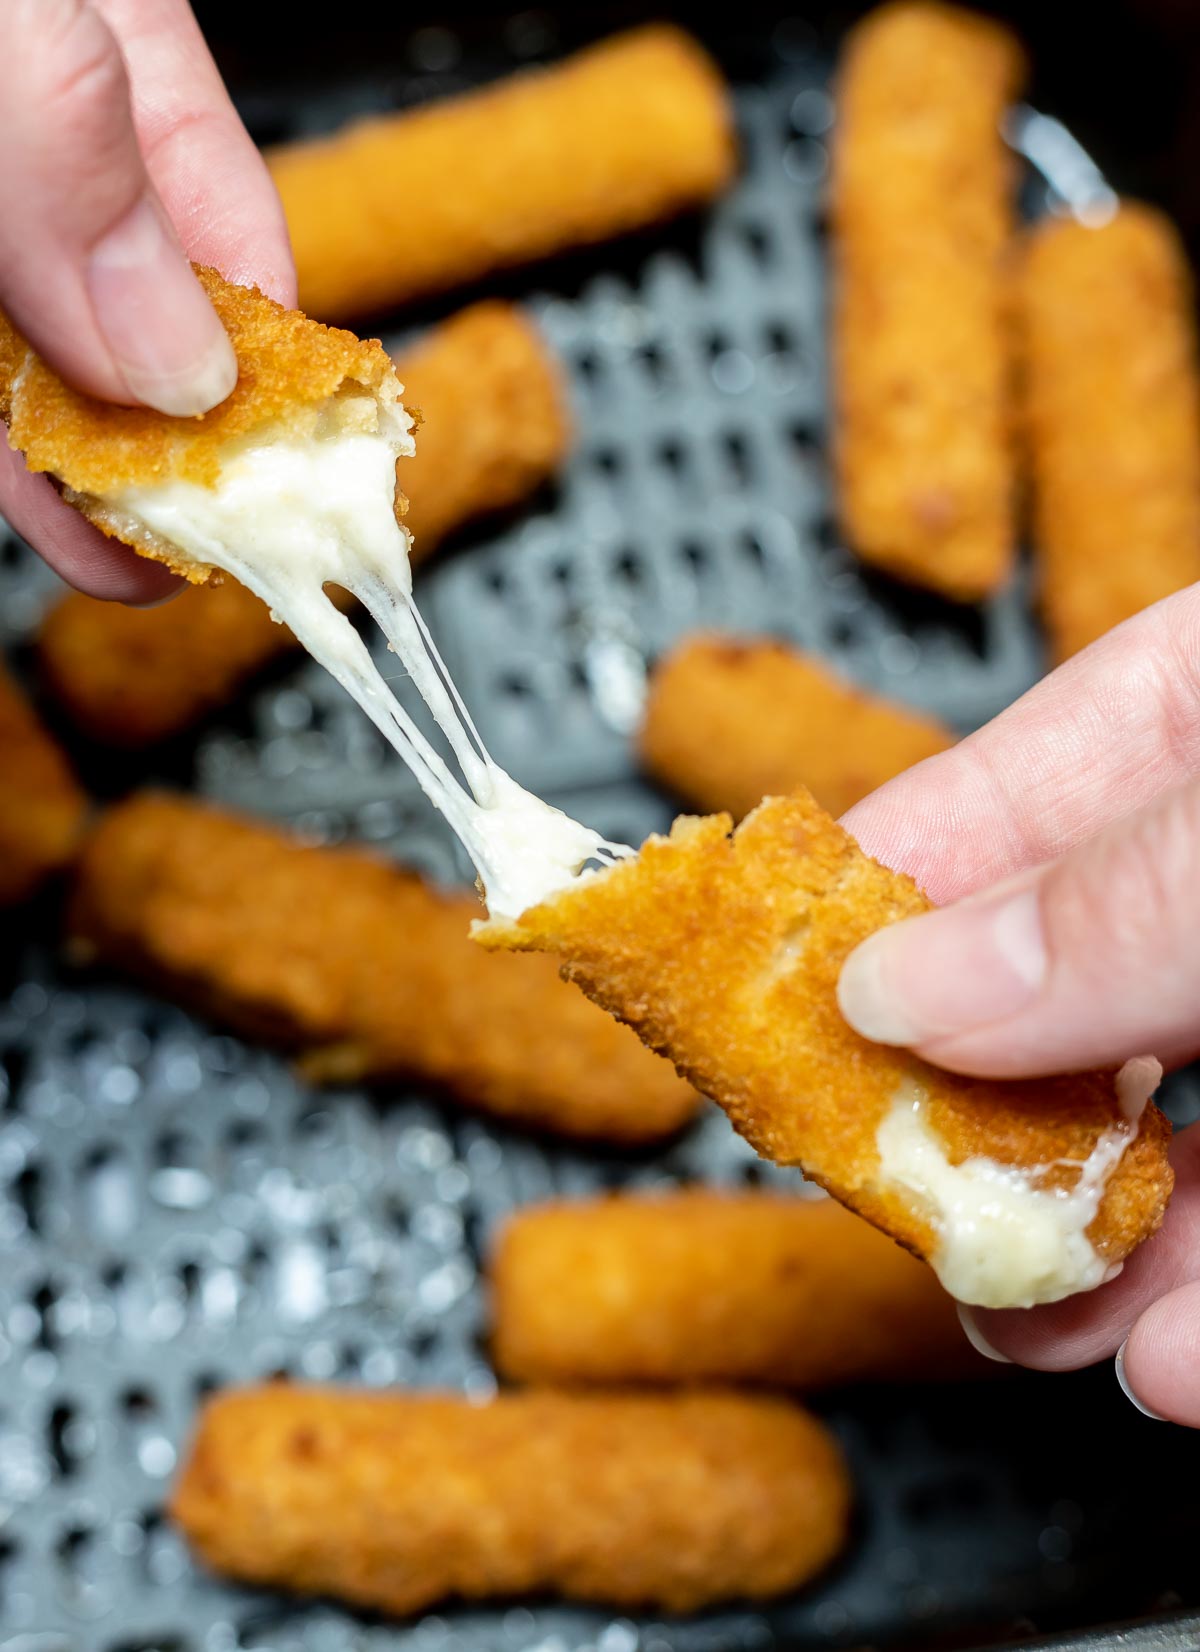 hands pulling cheese stick apart with stretchy cheese